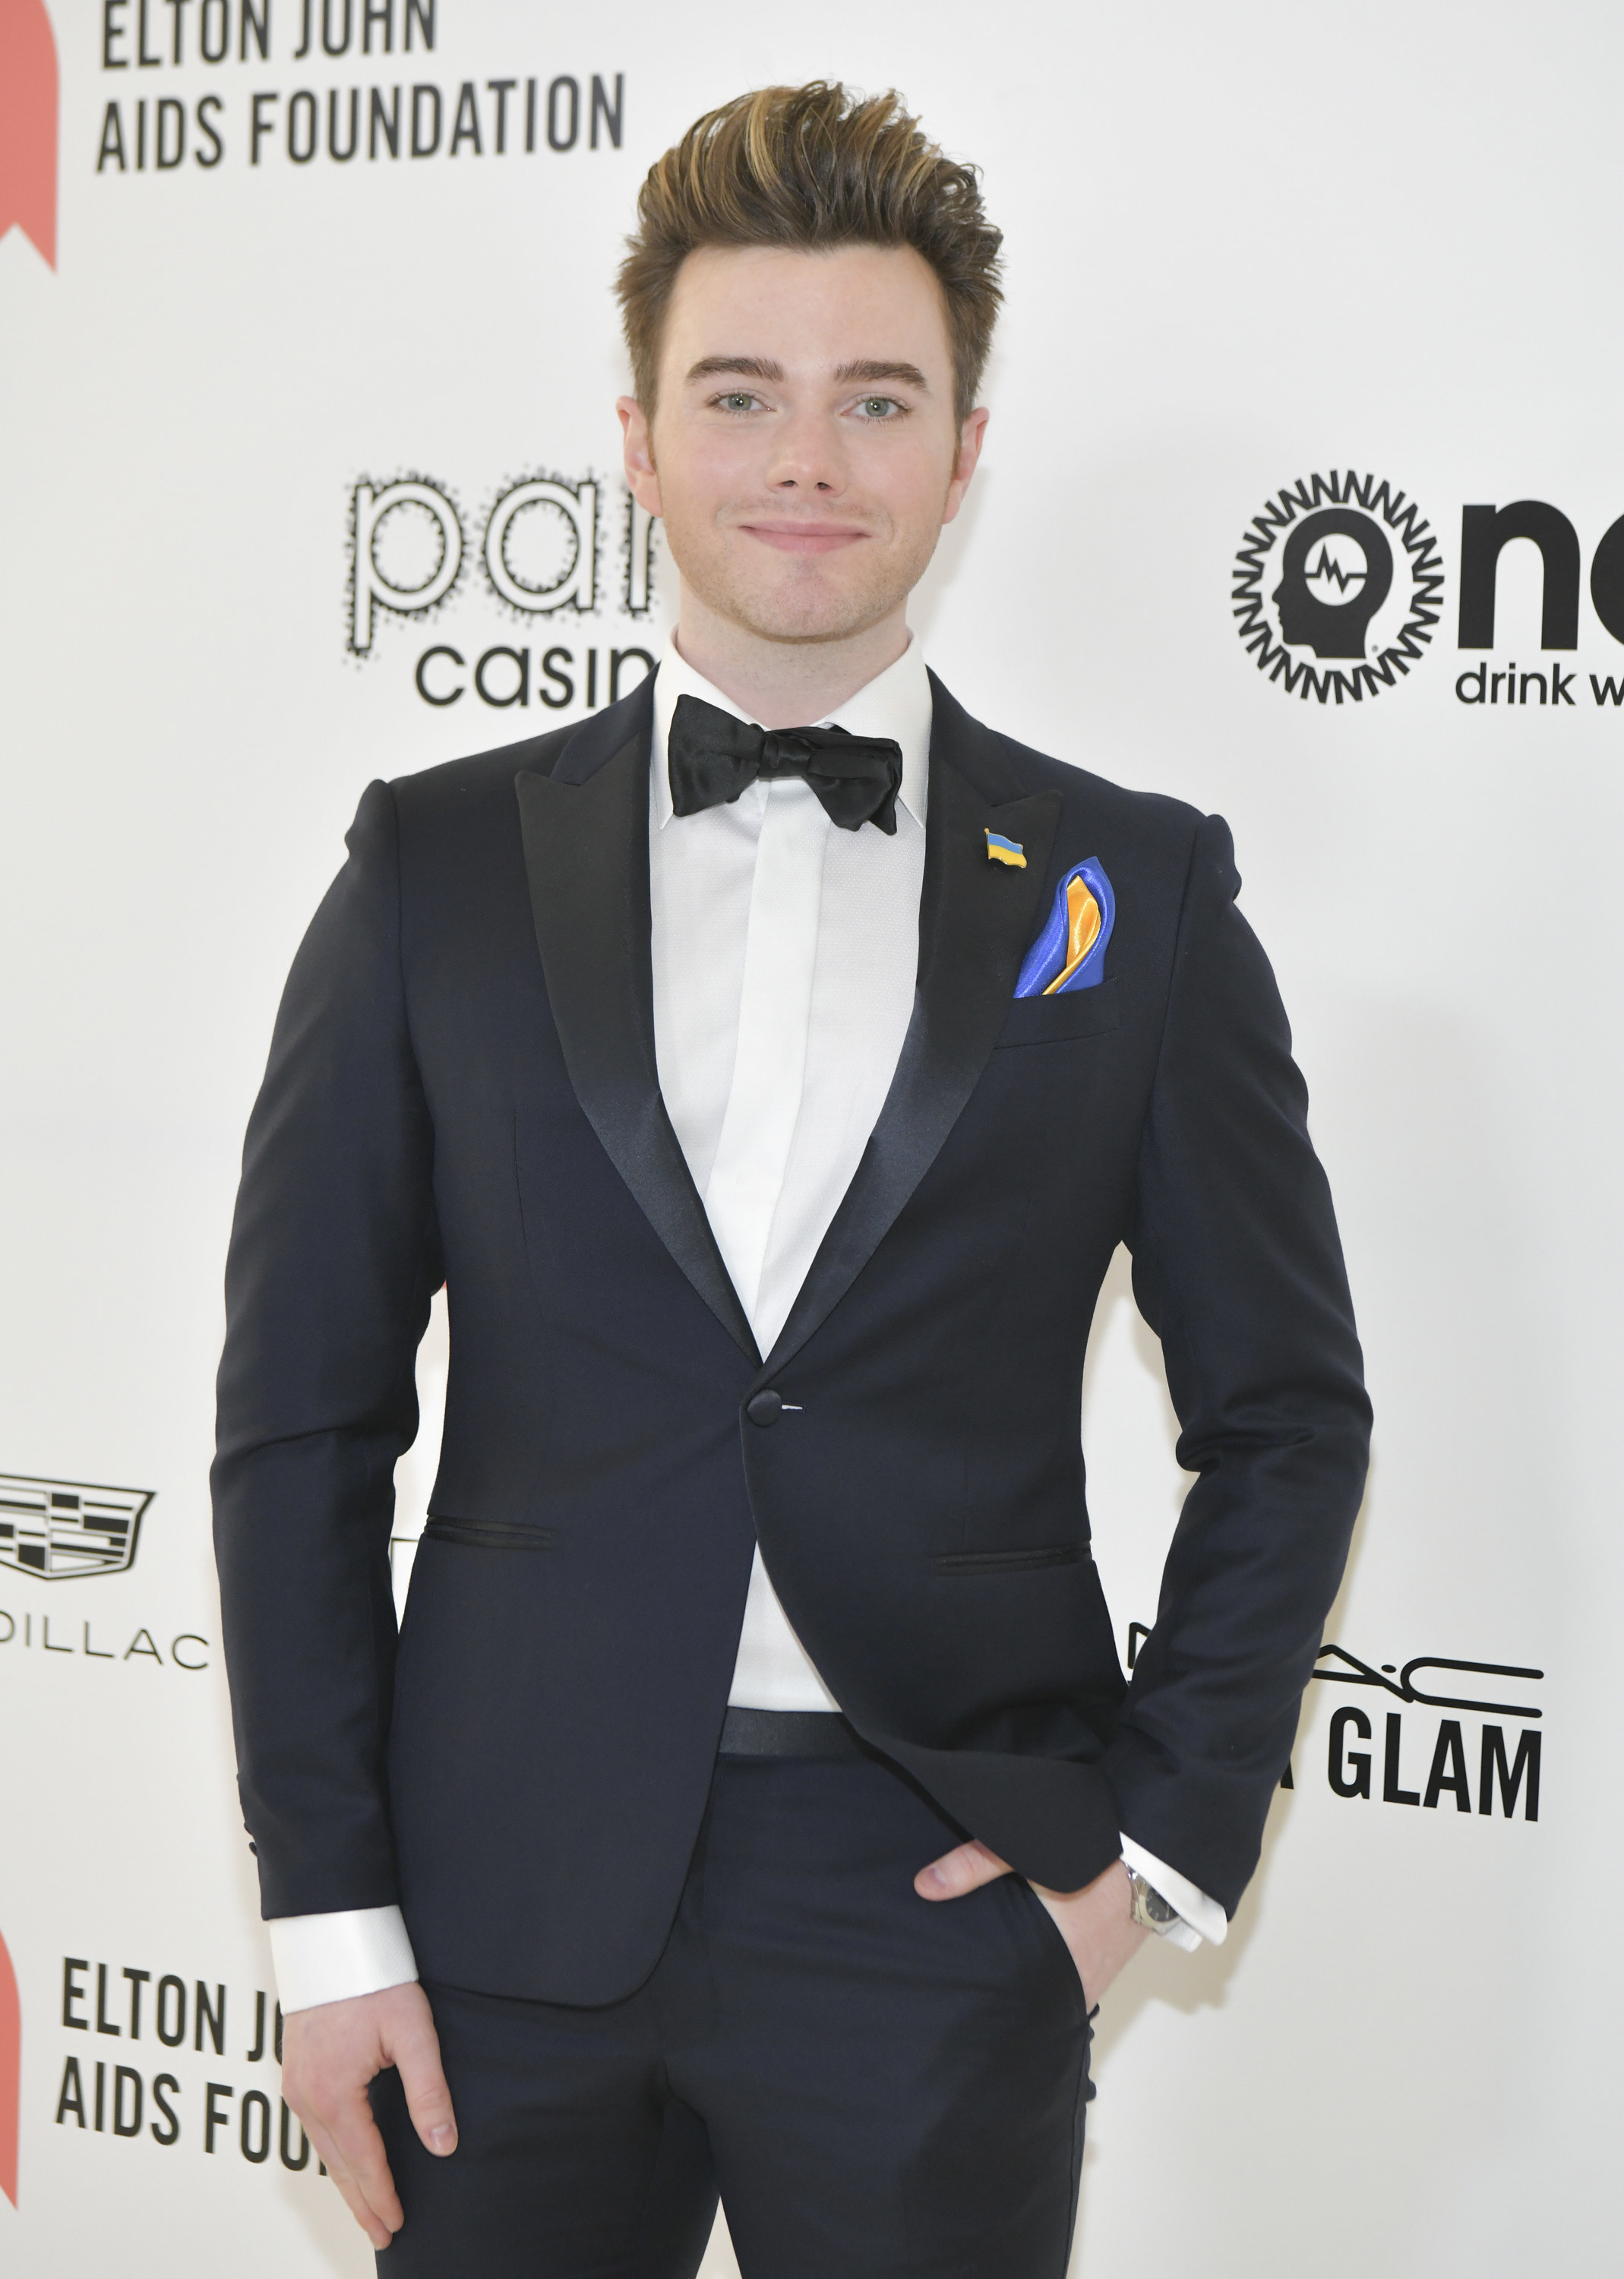 Chris in a tuxedo at a red carpet event